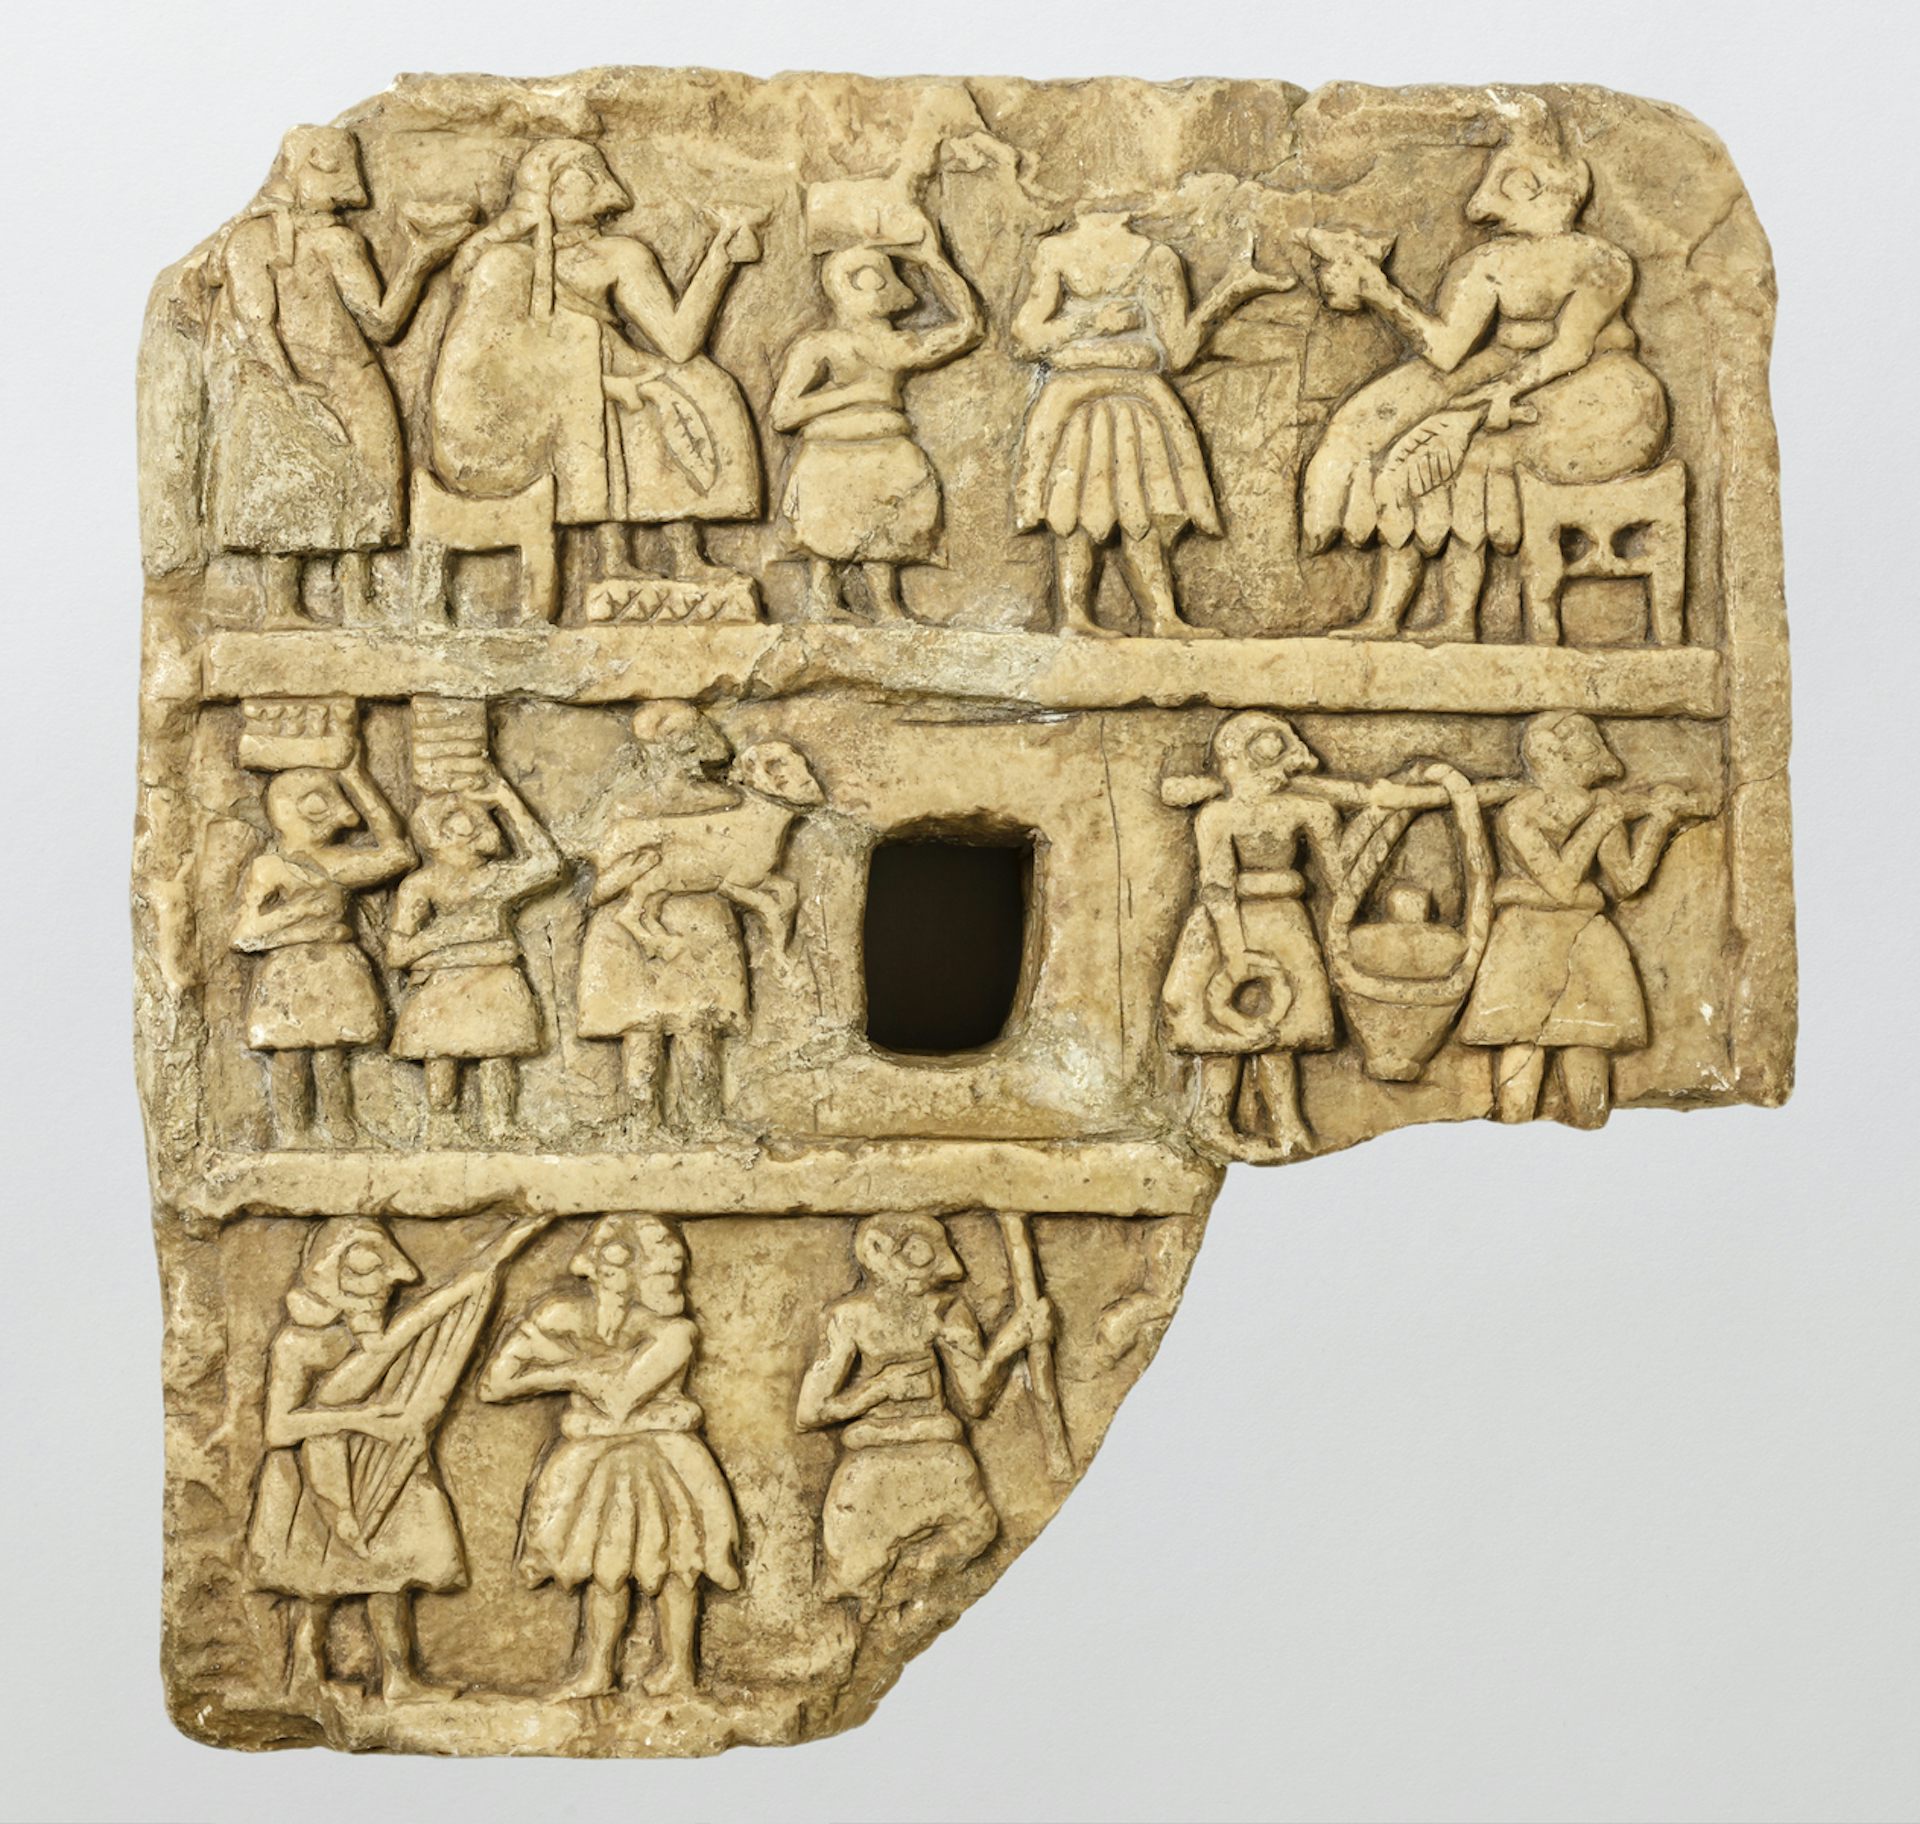 Stone plaque showing people gathered drinking out of cups